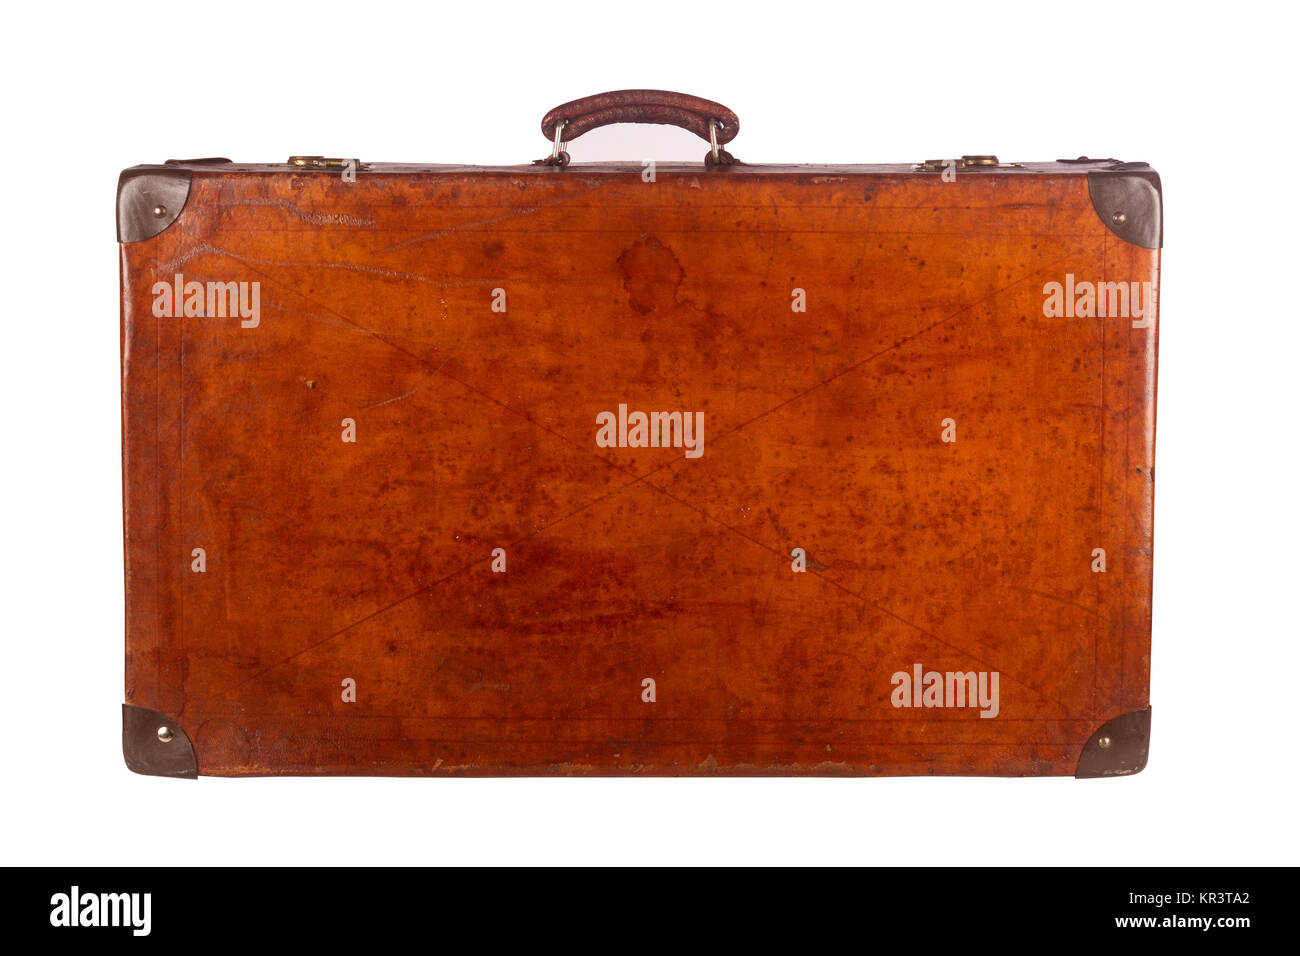 Old closed suitcase Stock Photo - Alamy